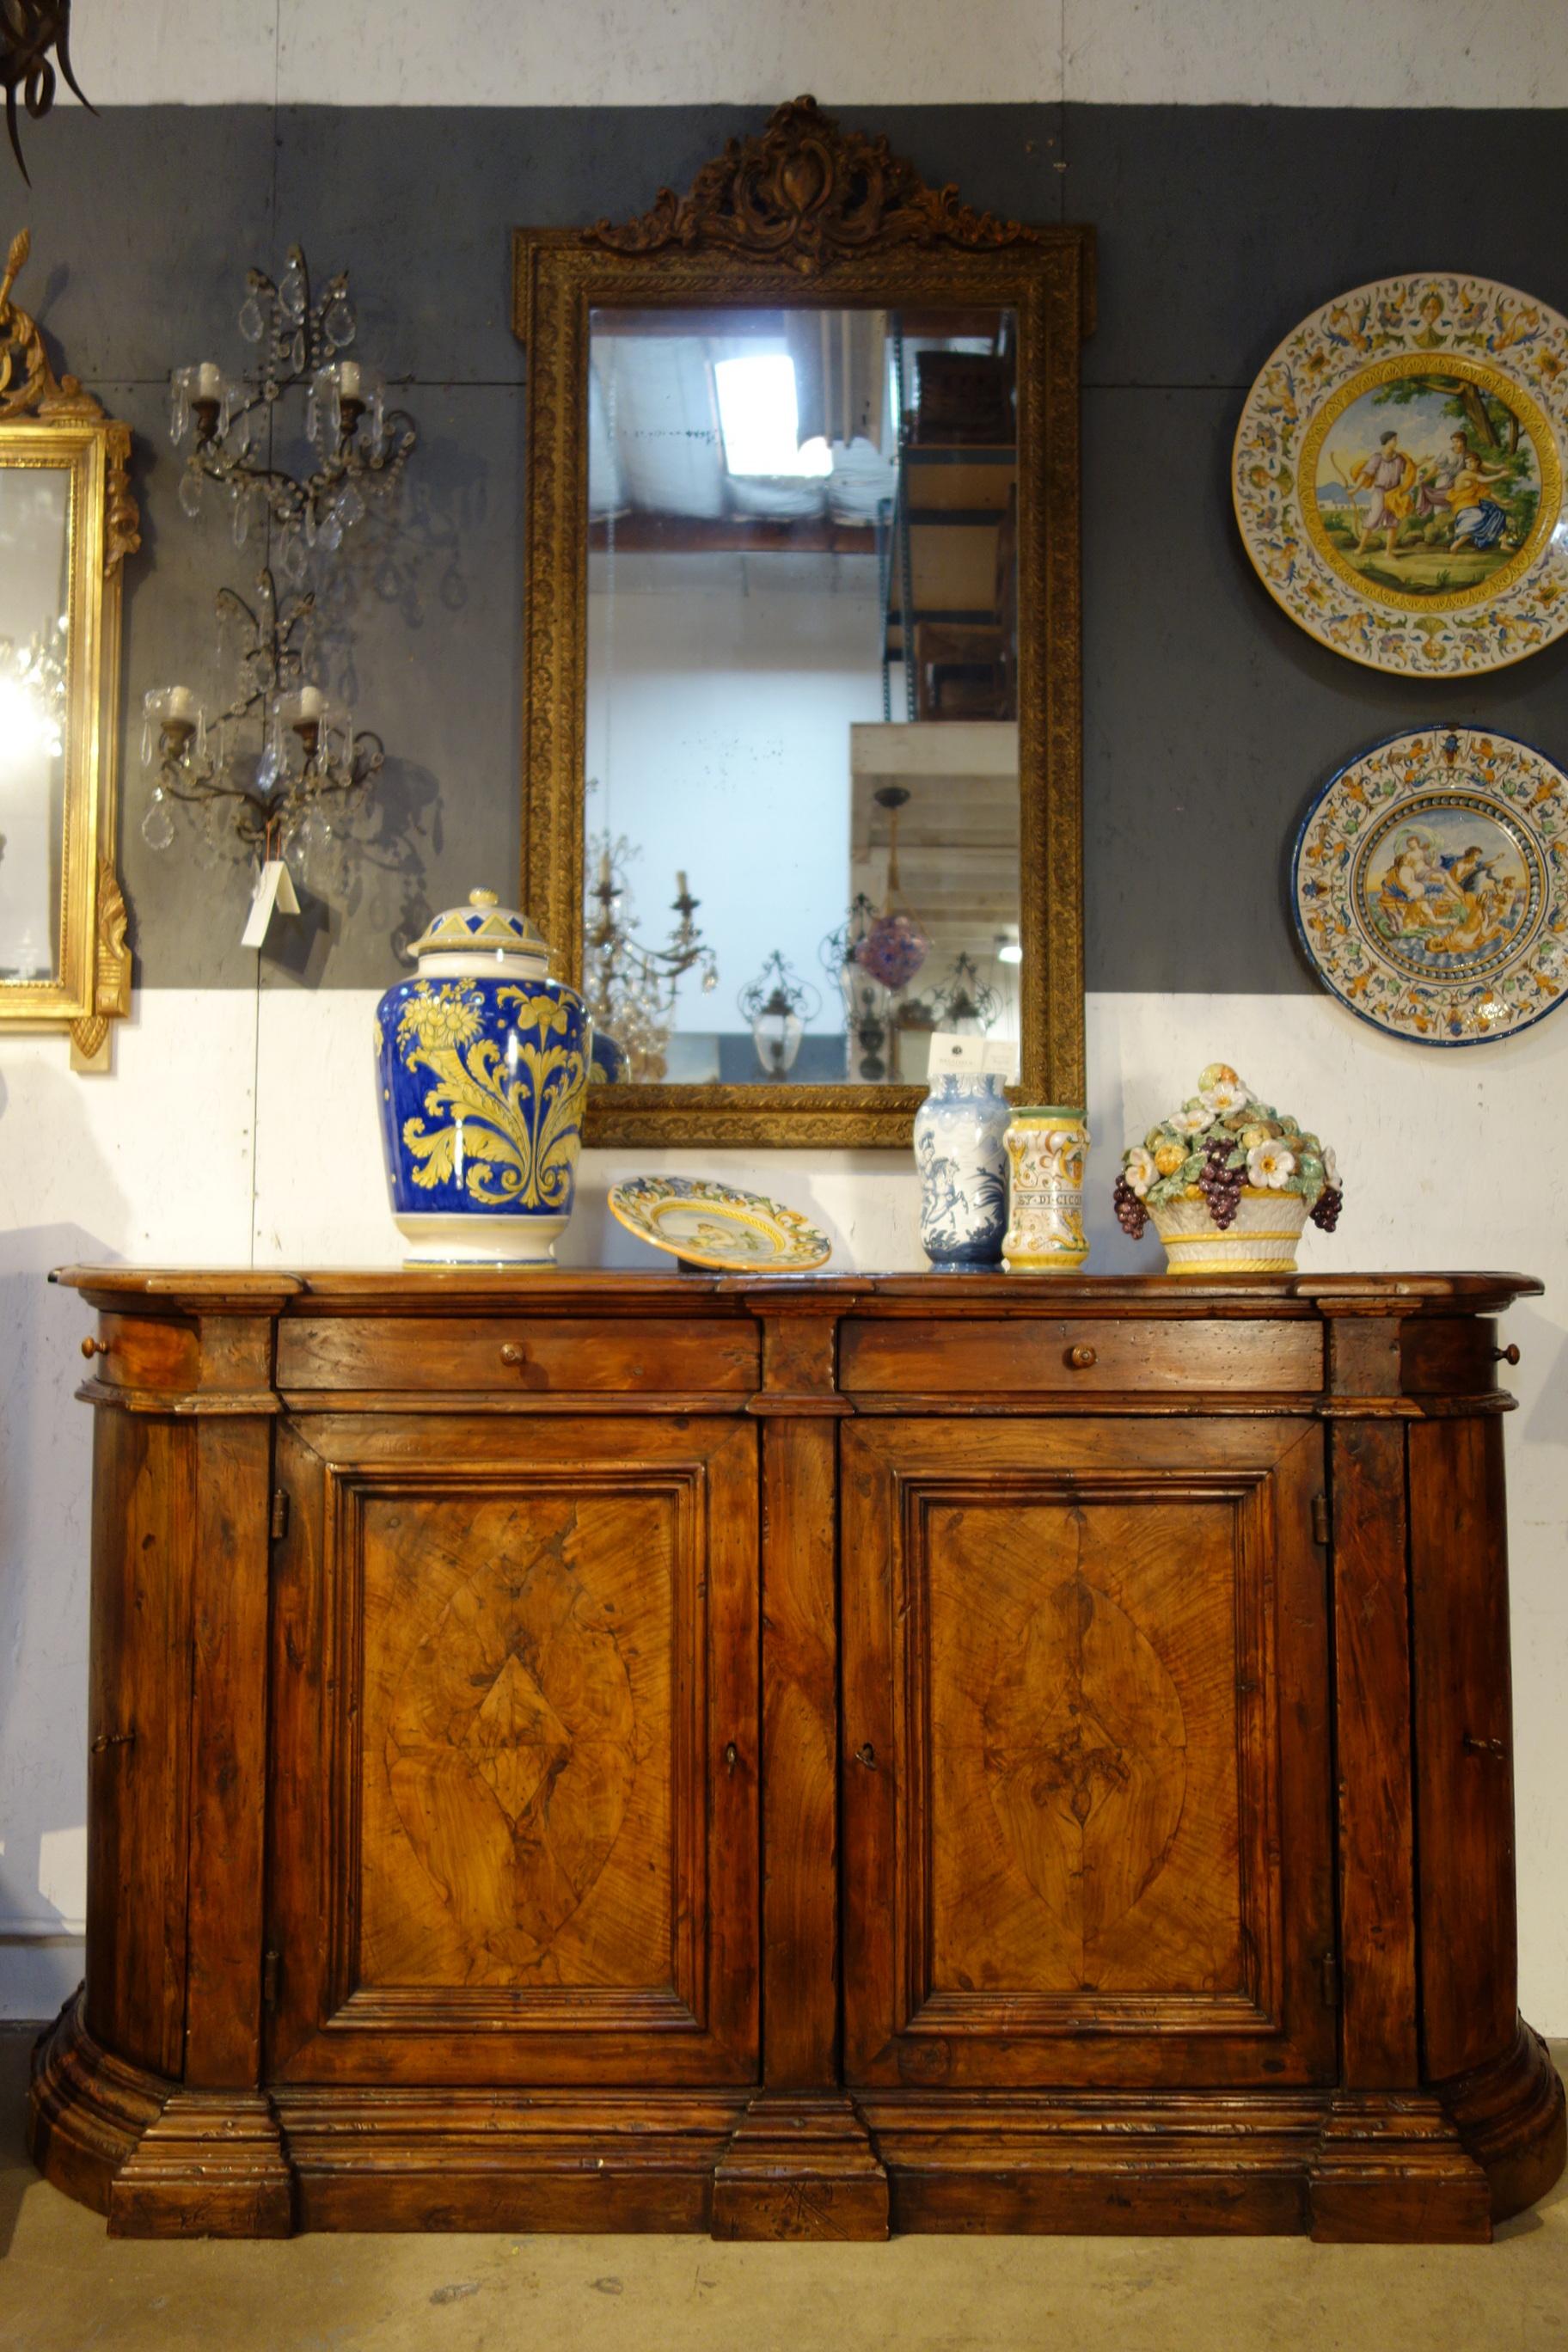 Custom sizing available with extraordinary Italian handcraft as exhibited in this 18th Century Style four-door and four-drawer credenza sideboard from Southern Italy, featuring thick Italian solid walnut planks, panels and trim with exceptional